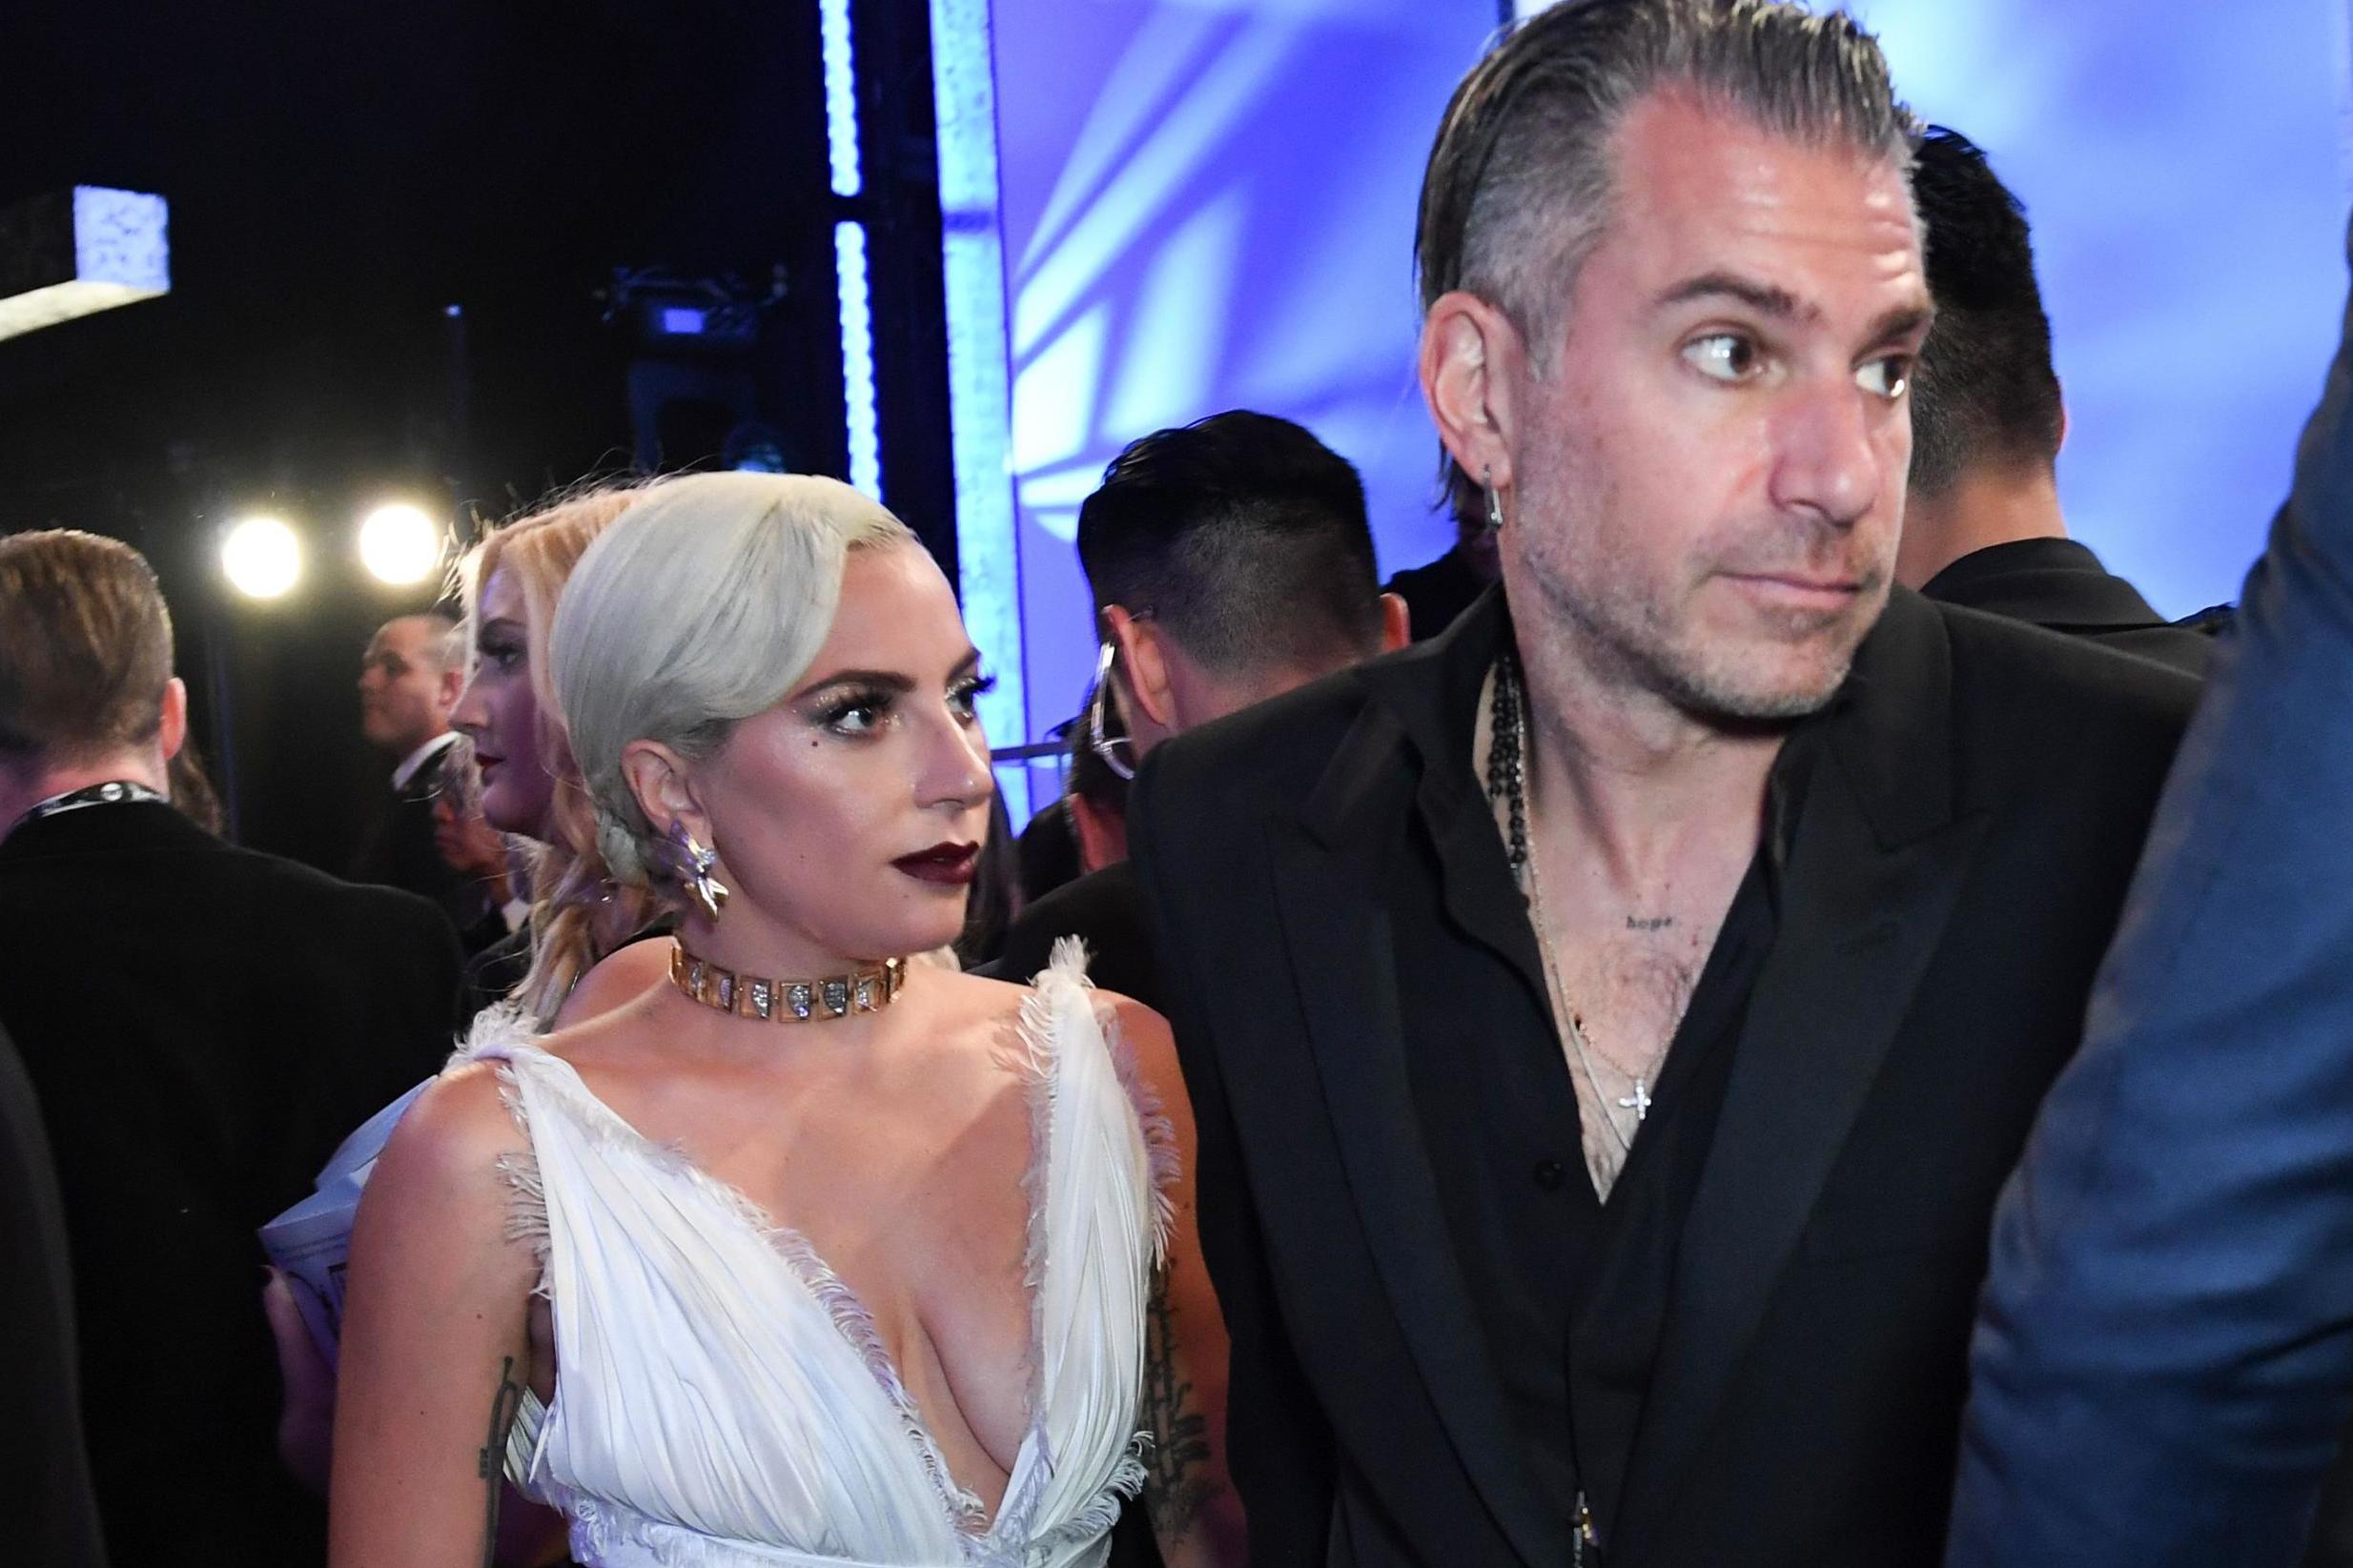 Lady Gaga and Christian Carino attend the 25th Annual Screen Actors Guild Awards show at the Shrine Auditorium in Los Angeles on 27 January, 2019. (Photo credit VALERIE MACON/AFP/Getty Images)